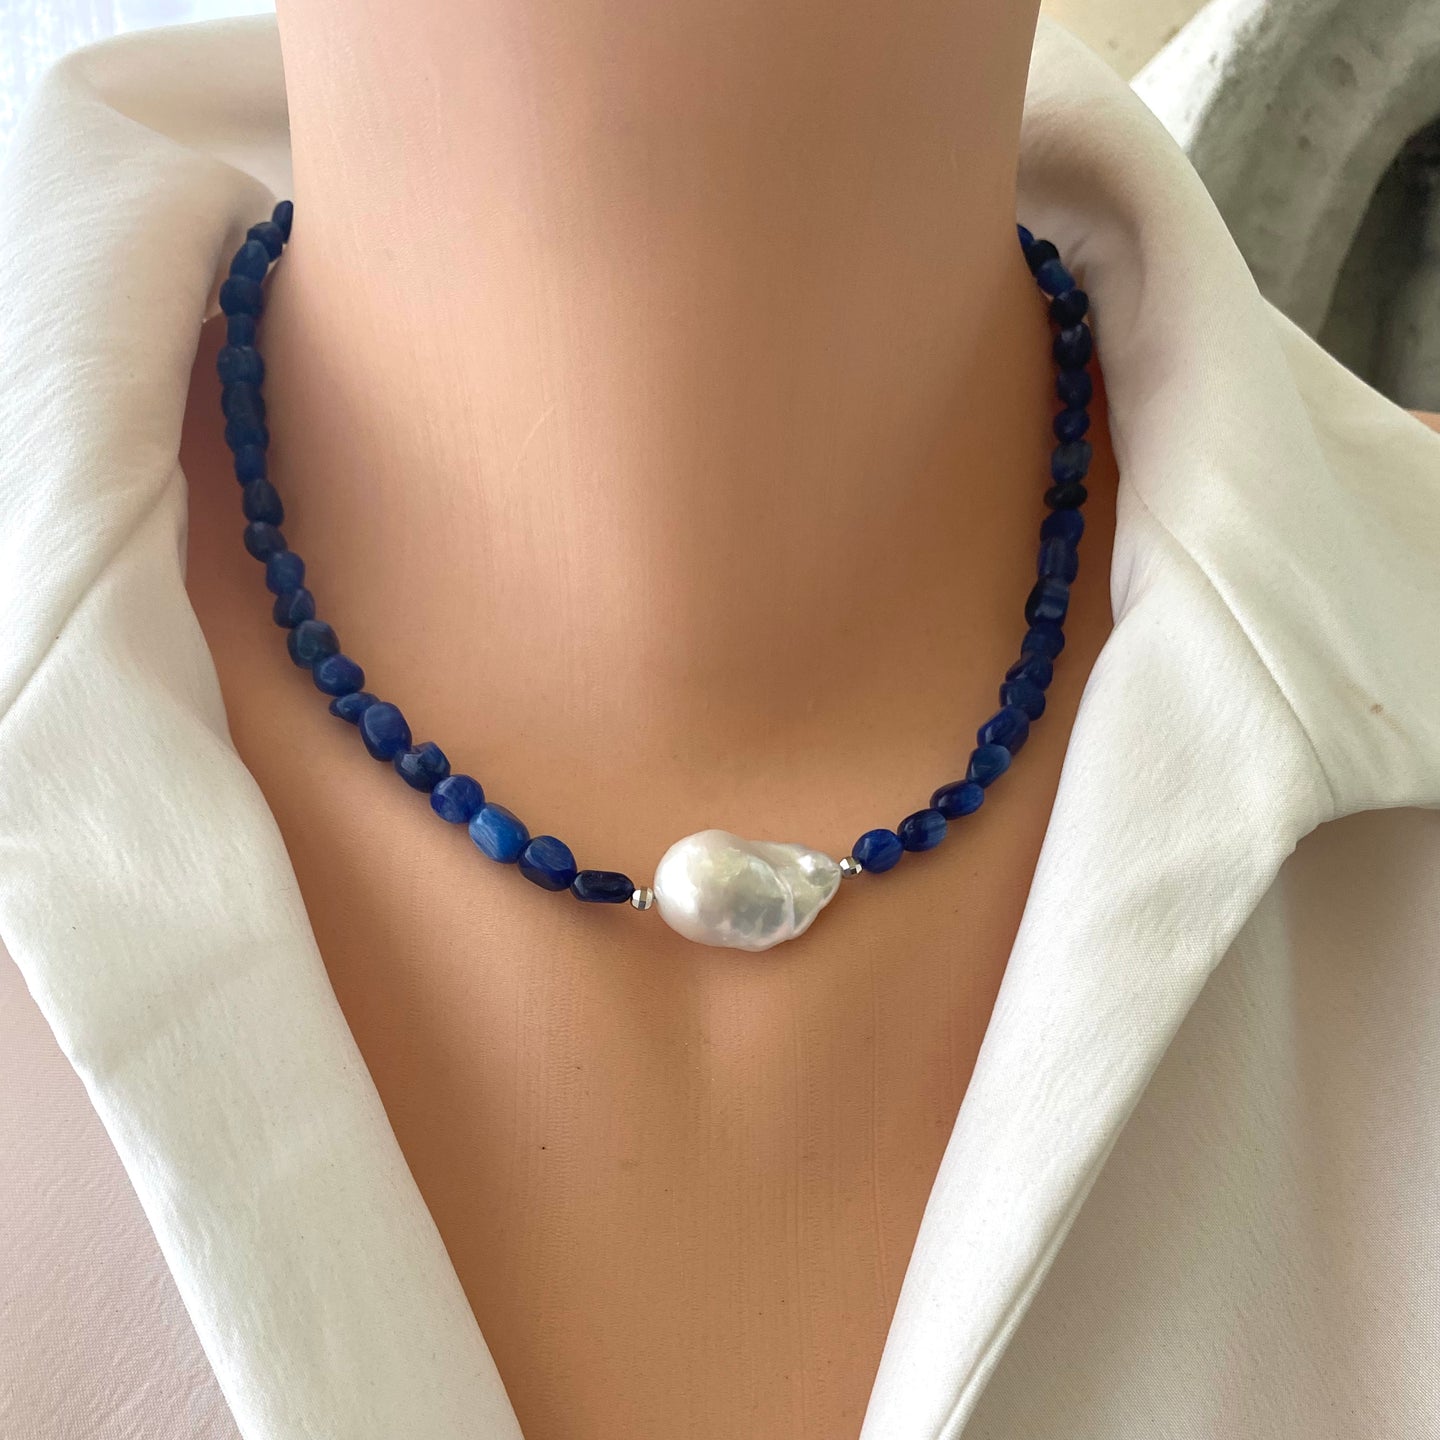 Kyanite and Baroque Pearl Necklace with Sterling Silver Beads and Closure, 17